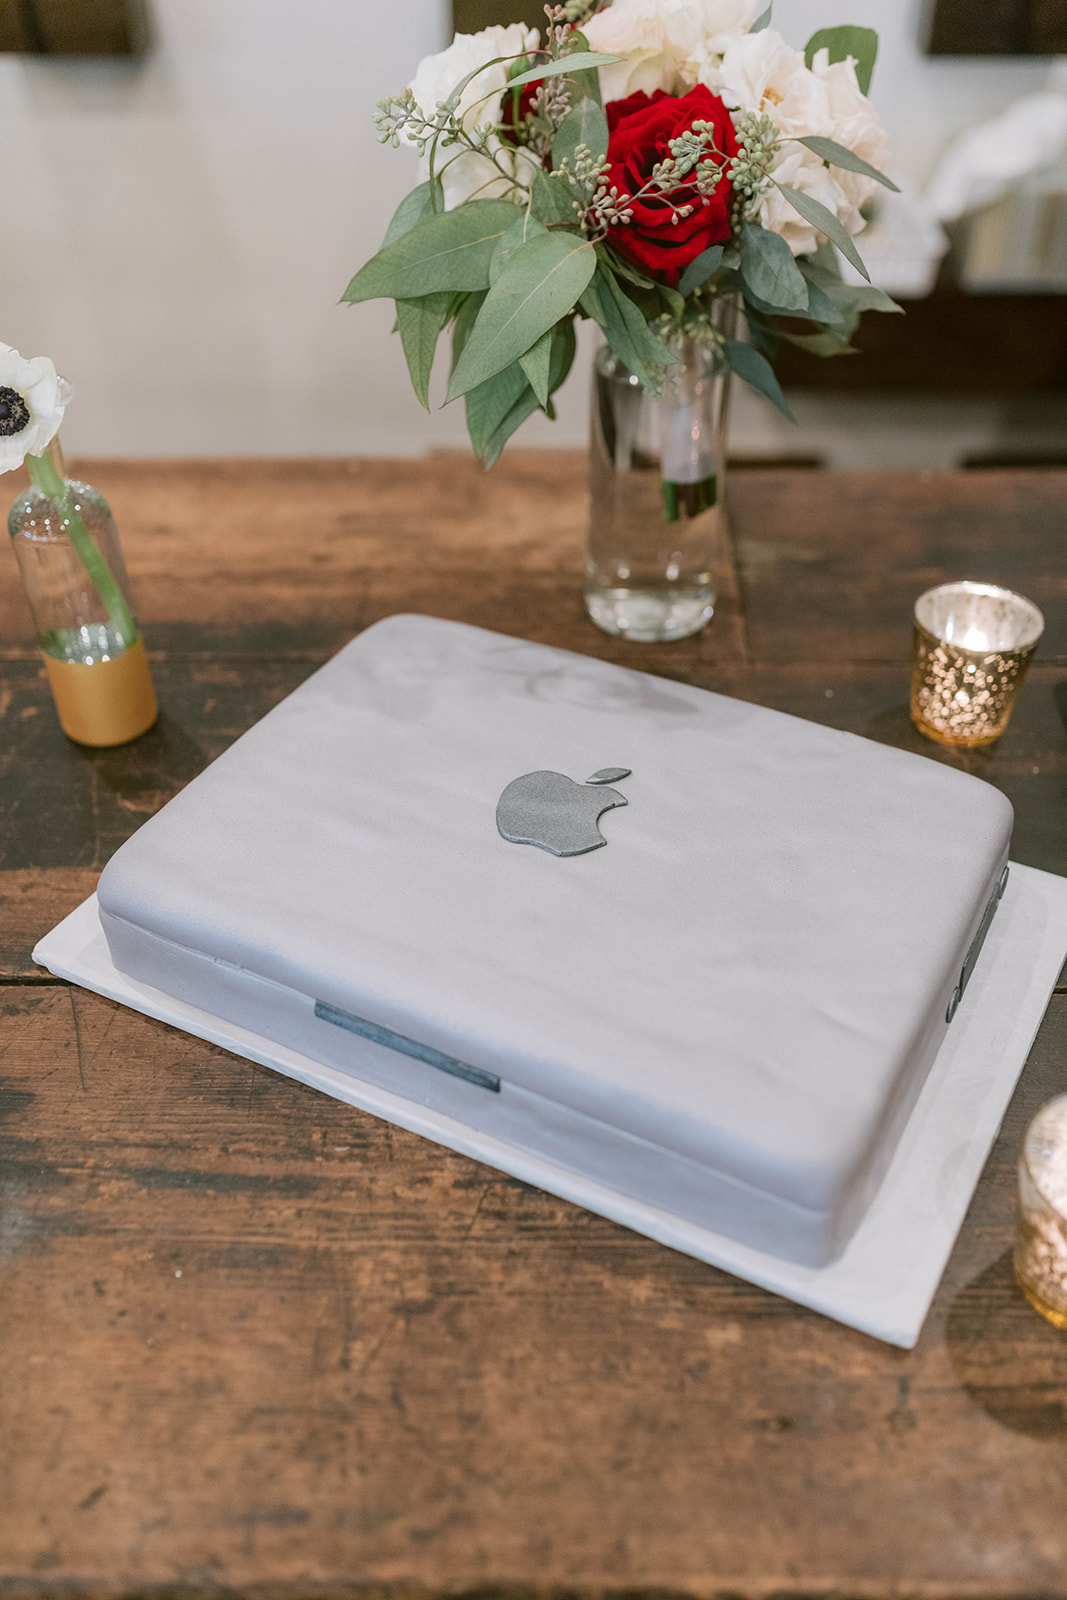 Apple Macbook wedding cake shown with wedding decor and toss bouquet at a Montaluce Winery Wedding